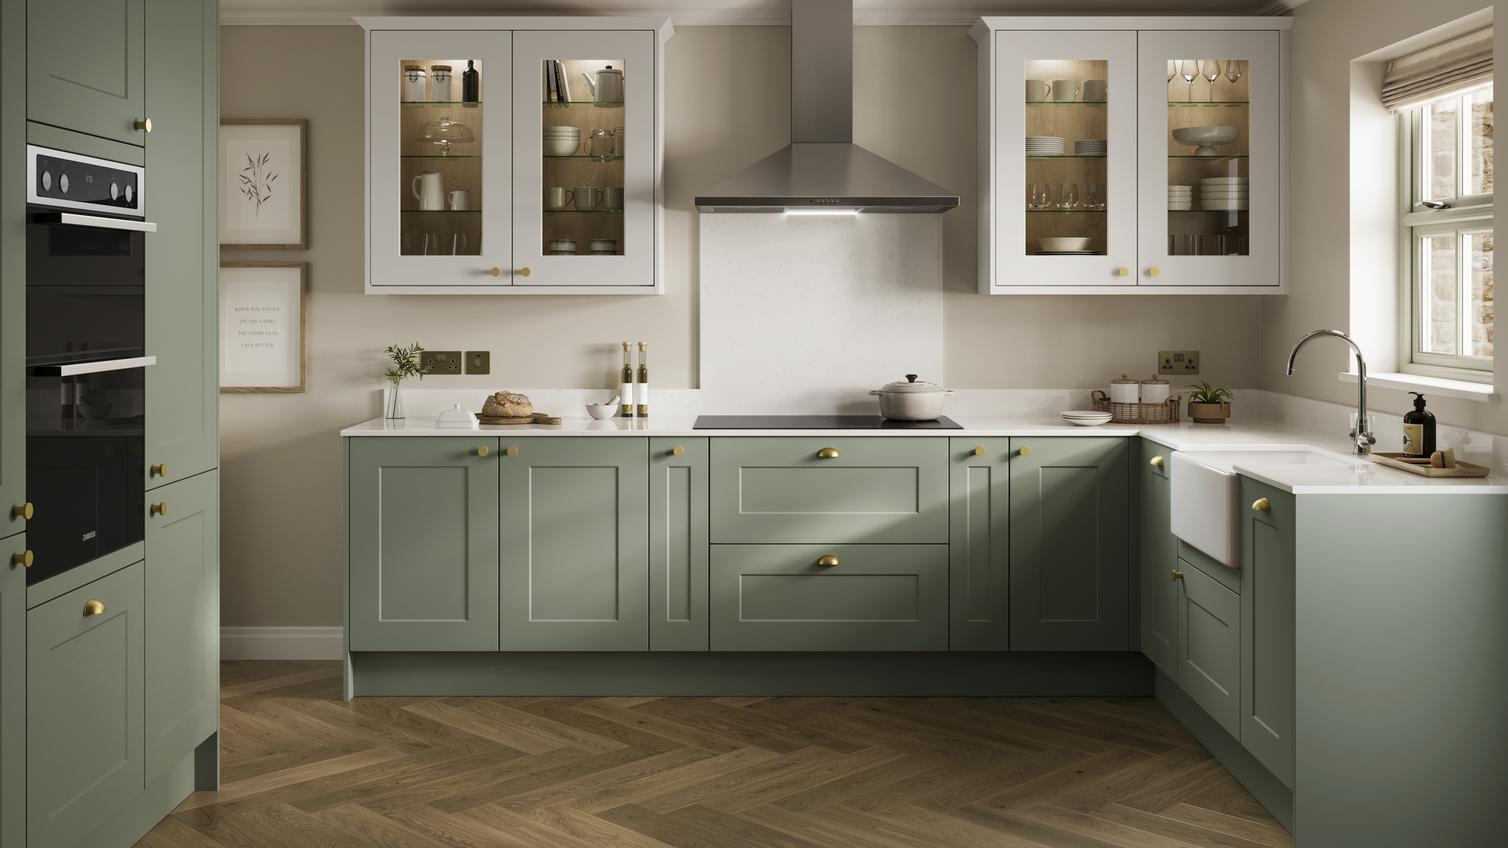 Light green shaker-style kitchen with glazed wall cabinets and herringbone oak flooring. Cabinets also have brass handles.